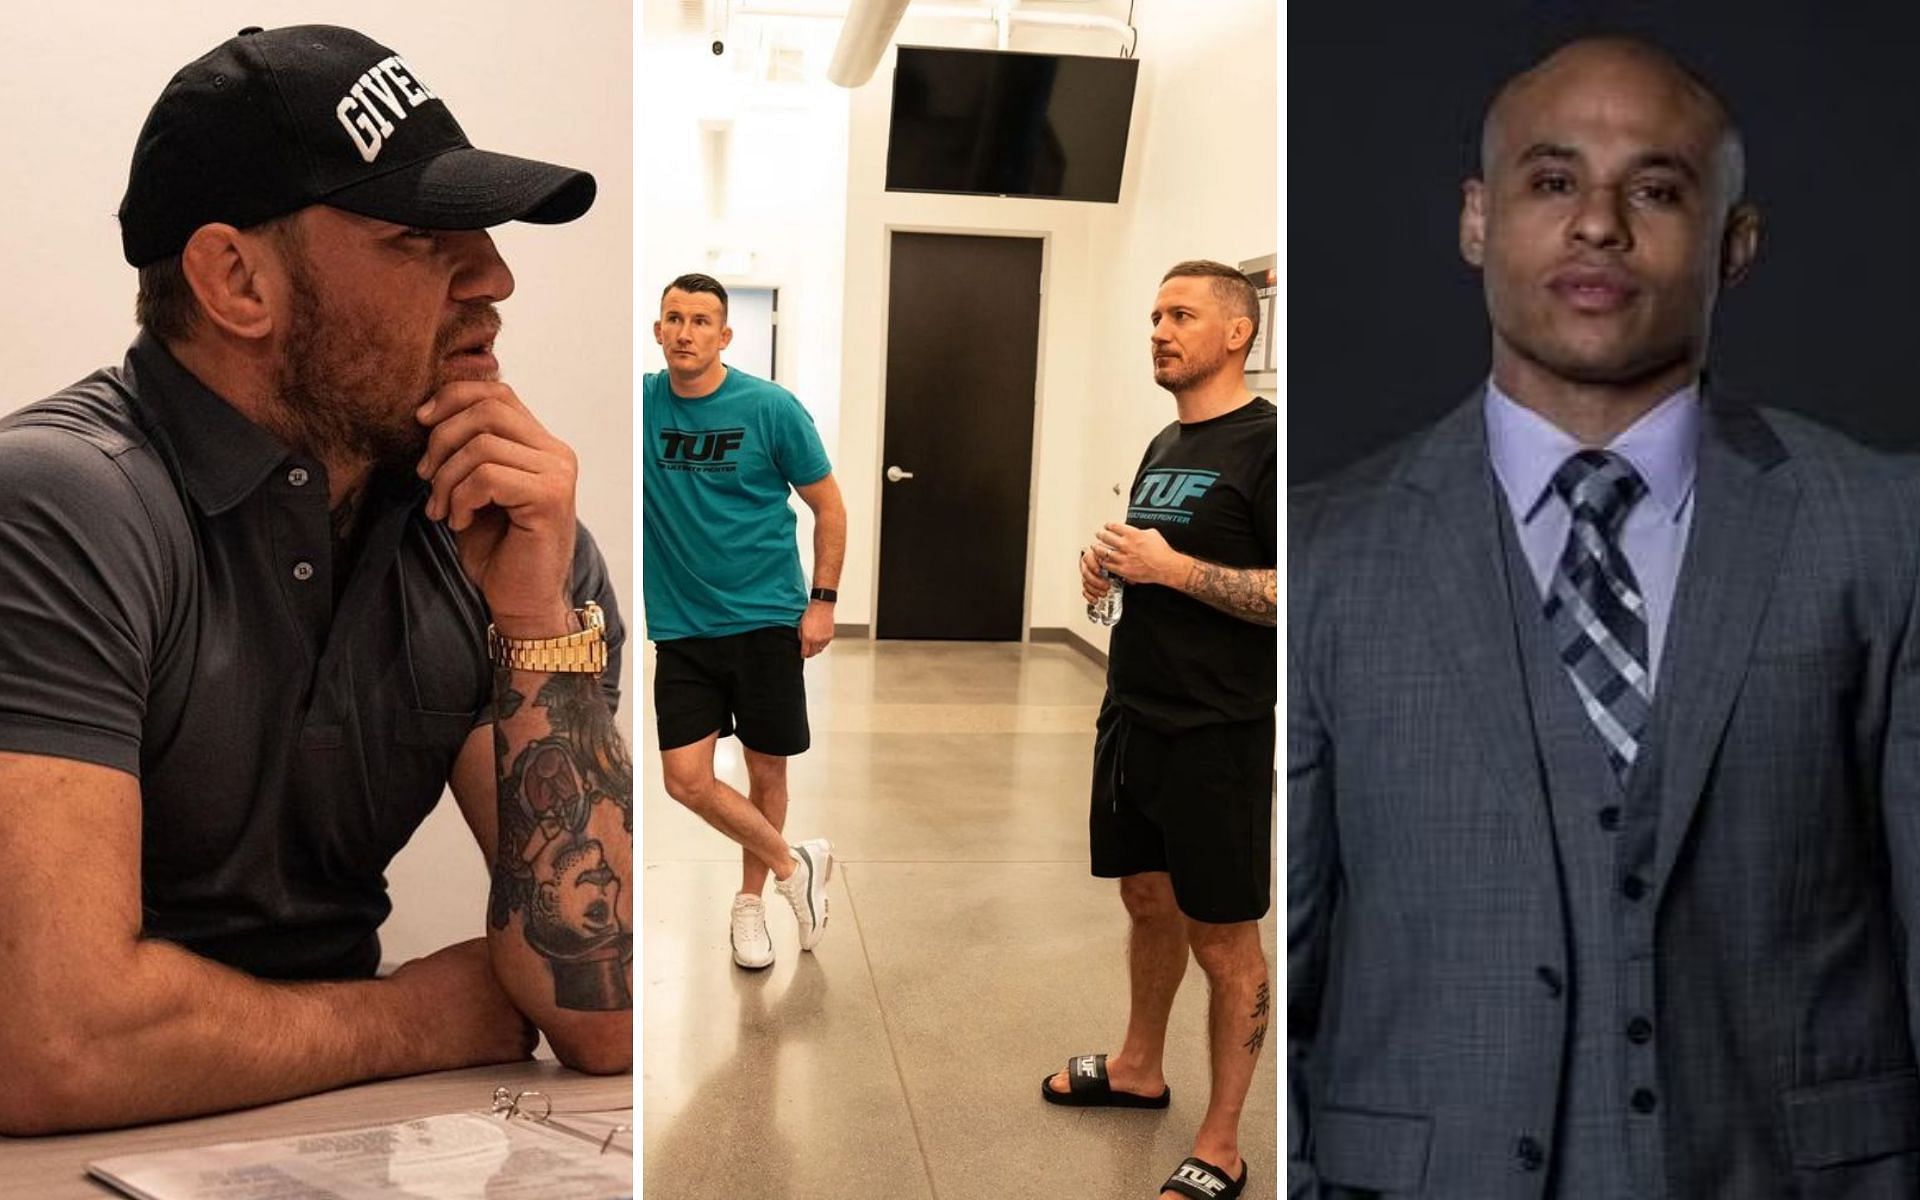 Conor McGregor (left), Owen Roddy and John Kavanagh (middle) and Ali Abdelaziz (right) [Image credits: @coach_kavanagh on Instagram]